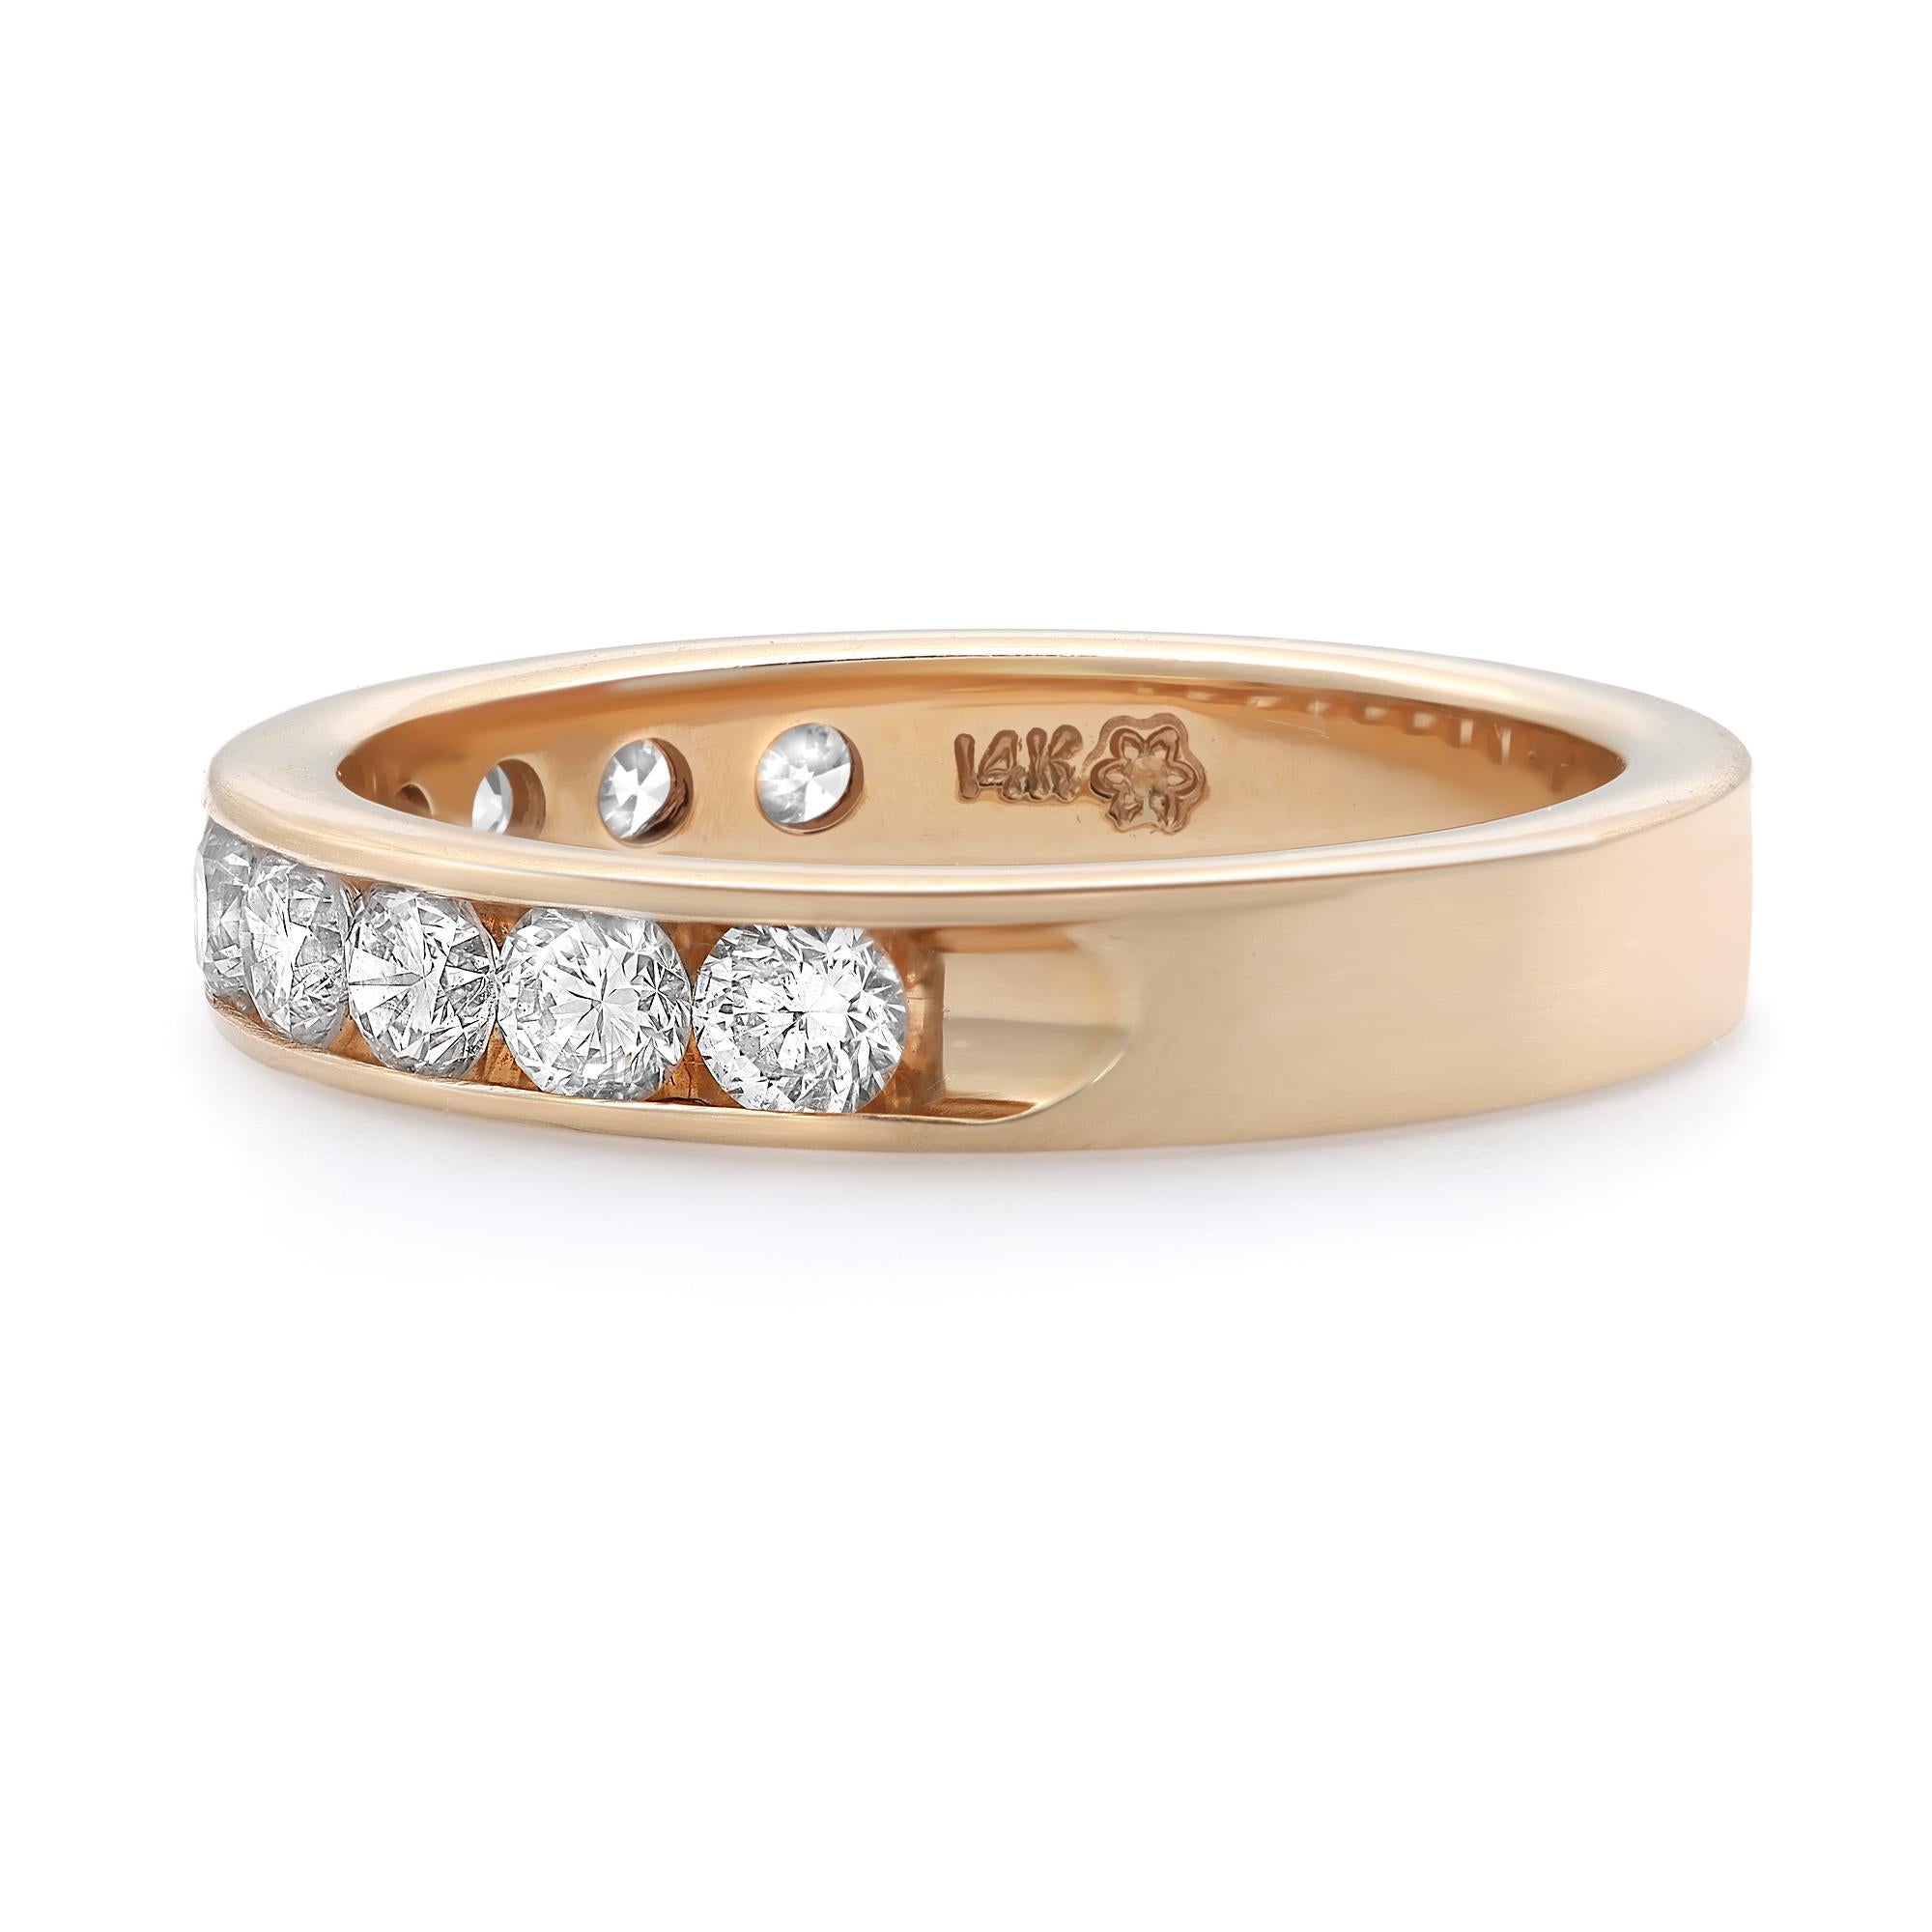 Timeless and stylish diamond wedding band ring. Crafted in fine 14k yellow gold. This ring features 10 dazzling round brilliant cut diamonds in channel setting. Perfect for a gift or as a promise ring. Total diamond weight: 1.00 carat. Diamond color